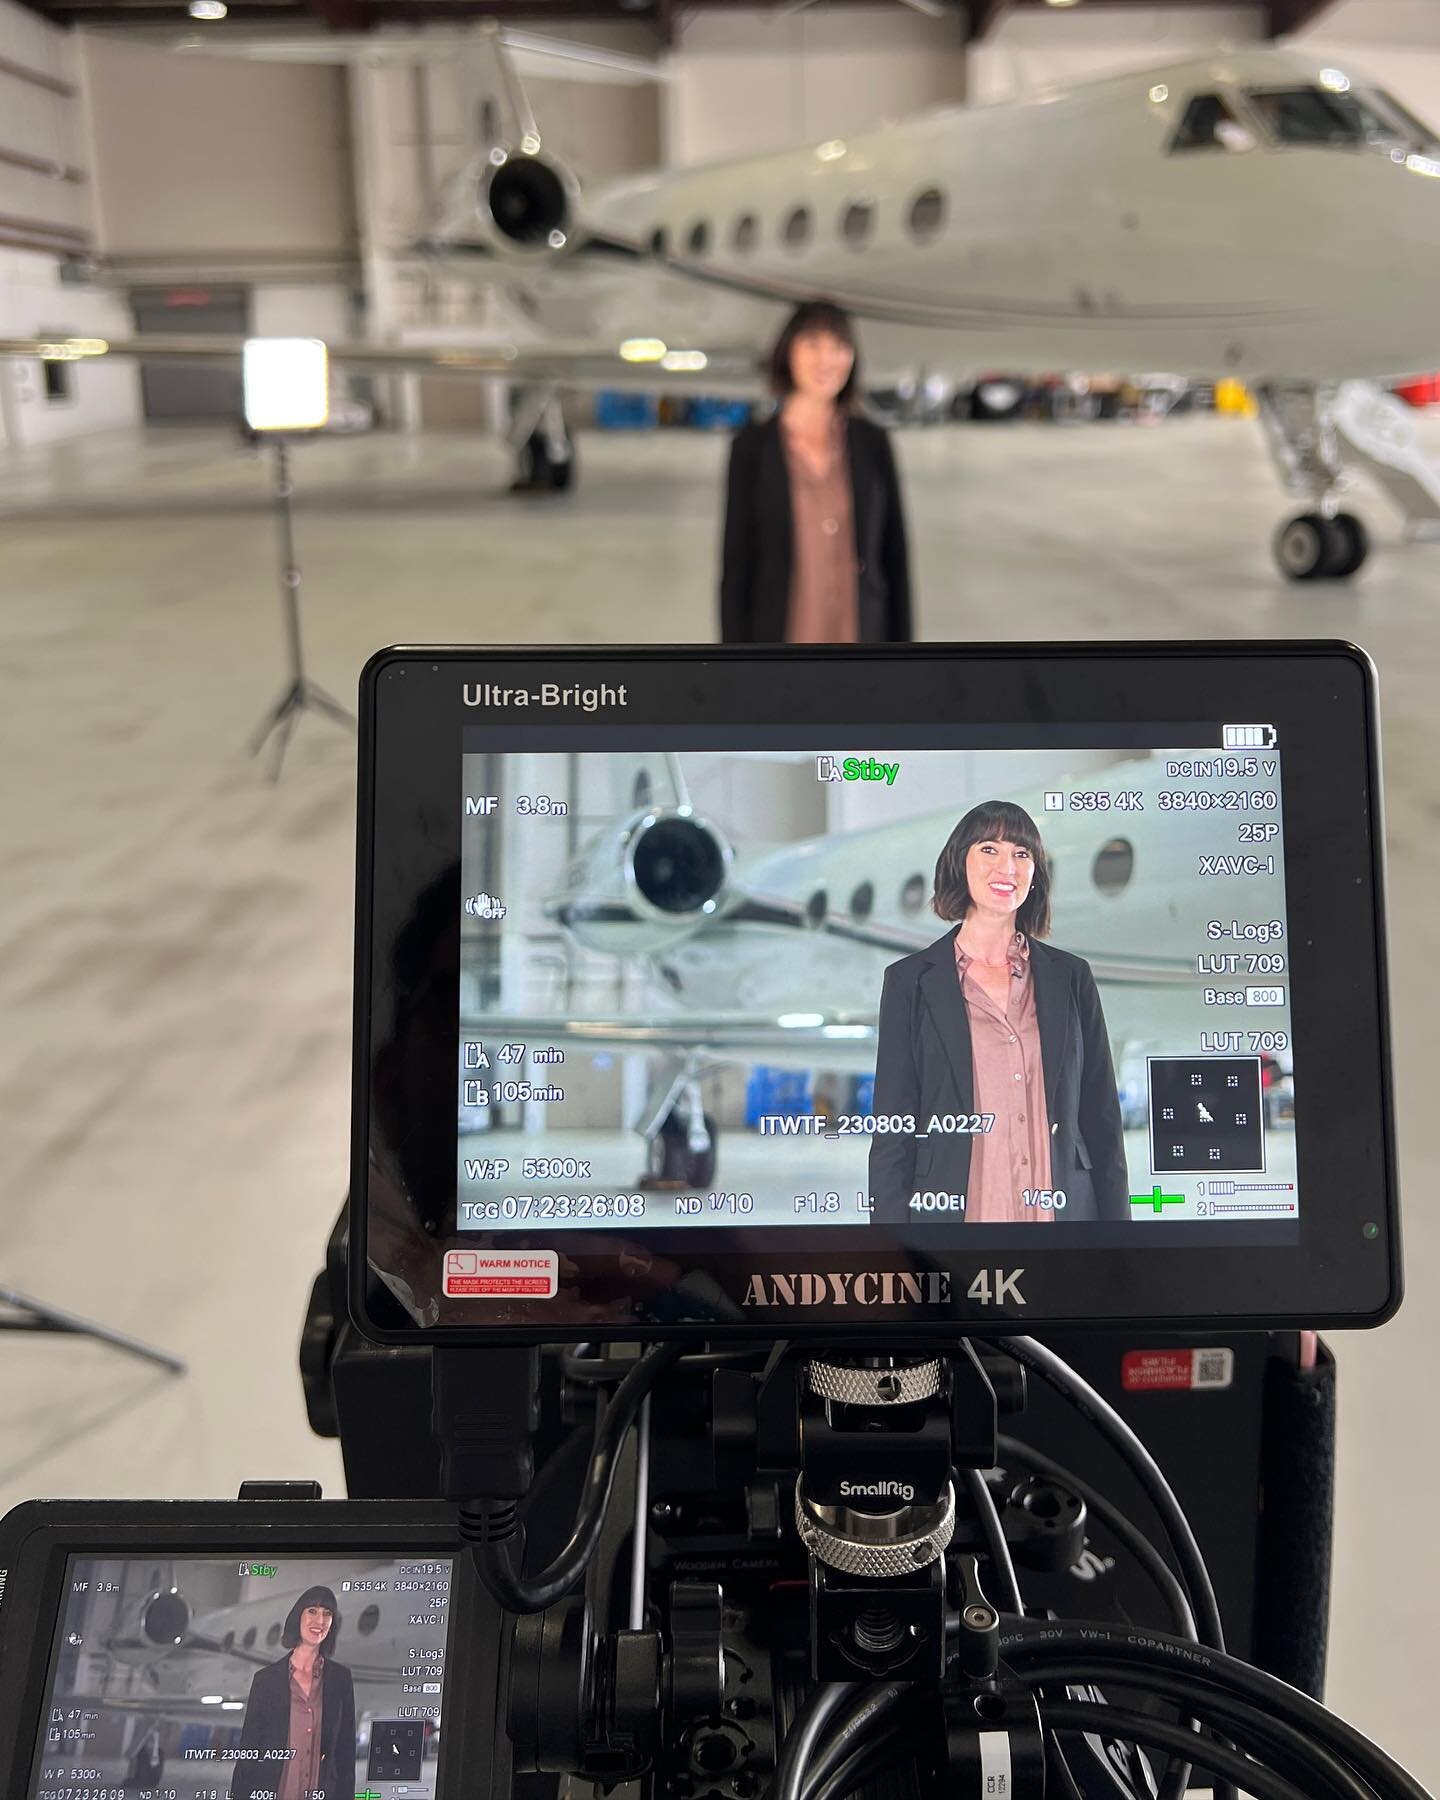 Had so much fun shooting for @k9jets_ 🐩 with an amazing crew! @paulcr_ @imstillcarl 🎥  Thanks for having me! ✈️ 

#tvhost #privatejetlife #k9jets #spokesperson #burbankairport #privatejetcharter